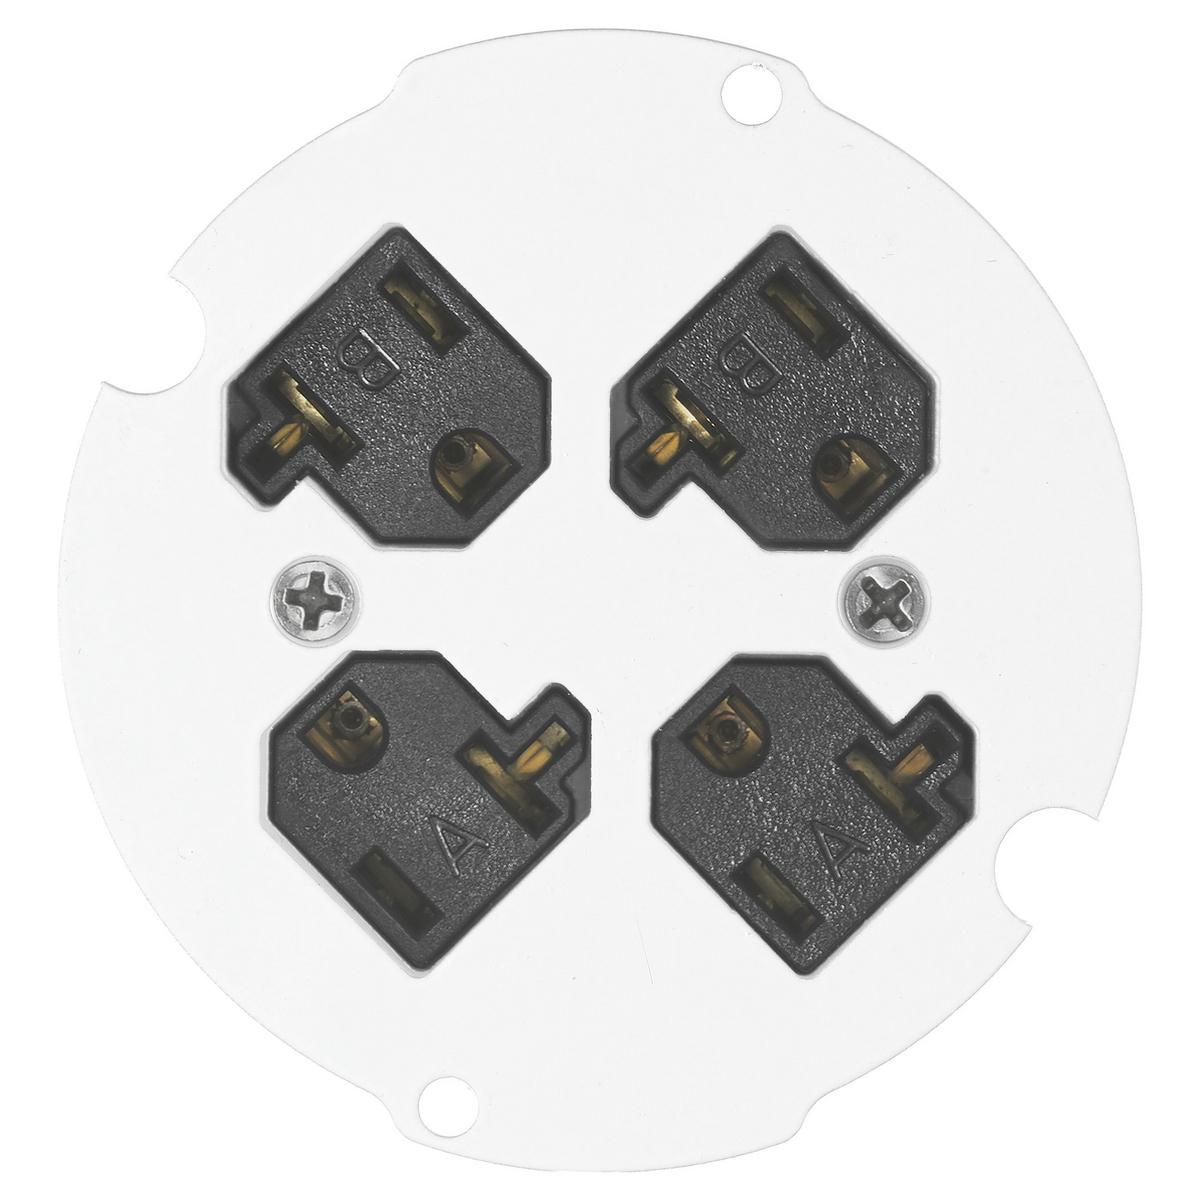 Hubbell S1R4SPQUAD In-Floor Delivery Systems, SystemOne, Recessed 4" Series, Sub Plate, Quad 20A 125V Receptacle  ; (1) 20A Quad Receptacle- 1 or 2 Circuit Wiring with Isolated Ground Stickers ; Steel Construction with White Powder Coat Paint ; Includes Necessary Mounting H